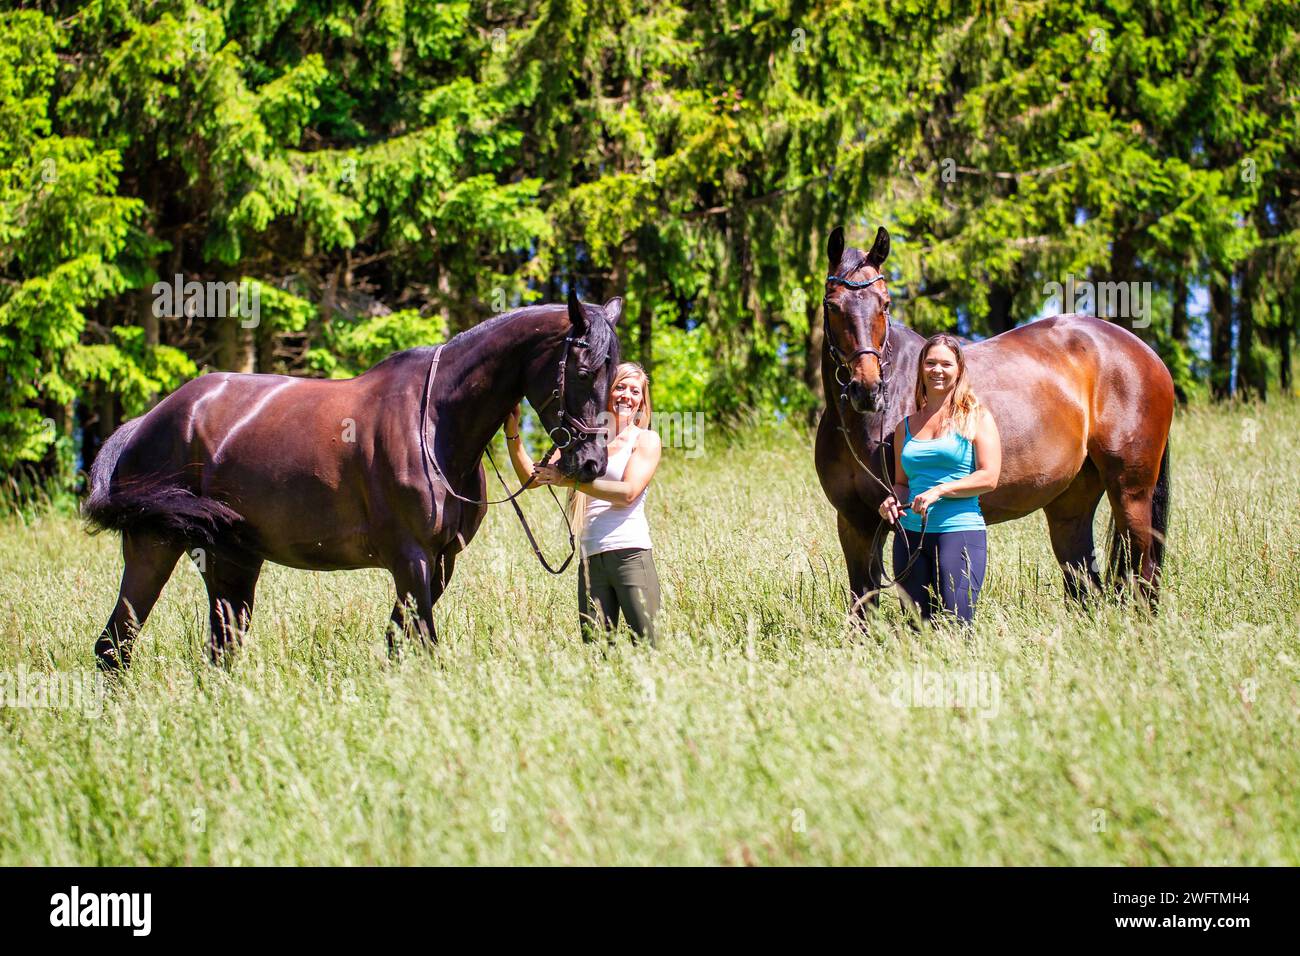 The picture shows two young women in light summer riding clothes with long brunette hair, standing with their horses on a summer meadow and laughing i Stock Photo